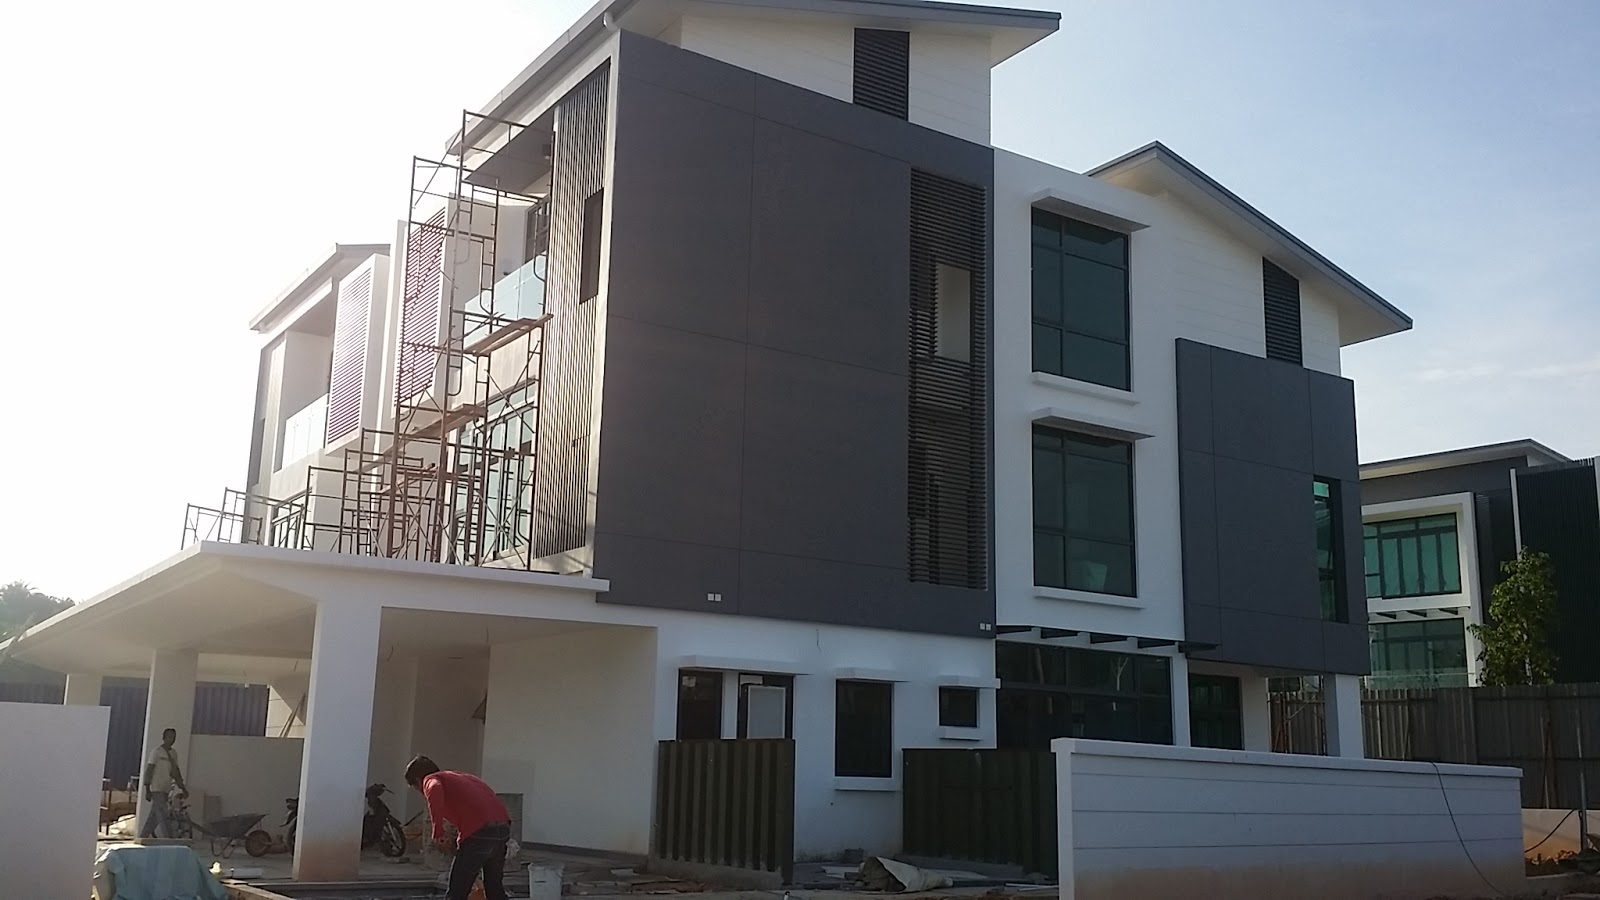 Property construction: Property Residence In Malaysia